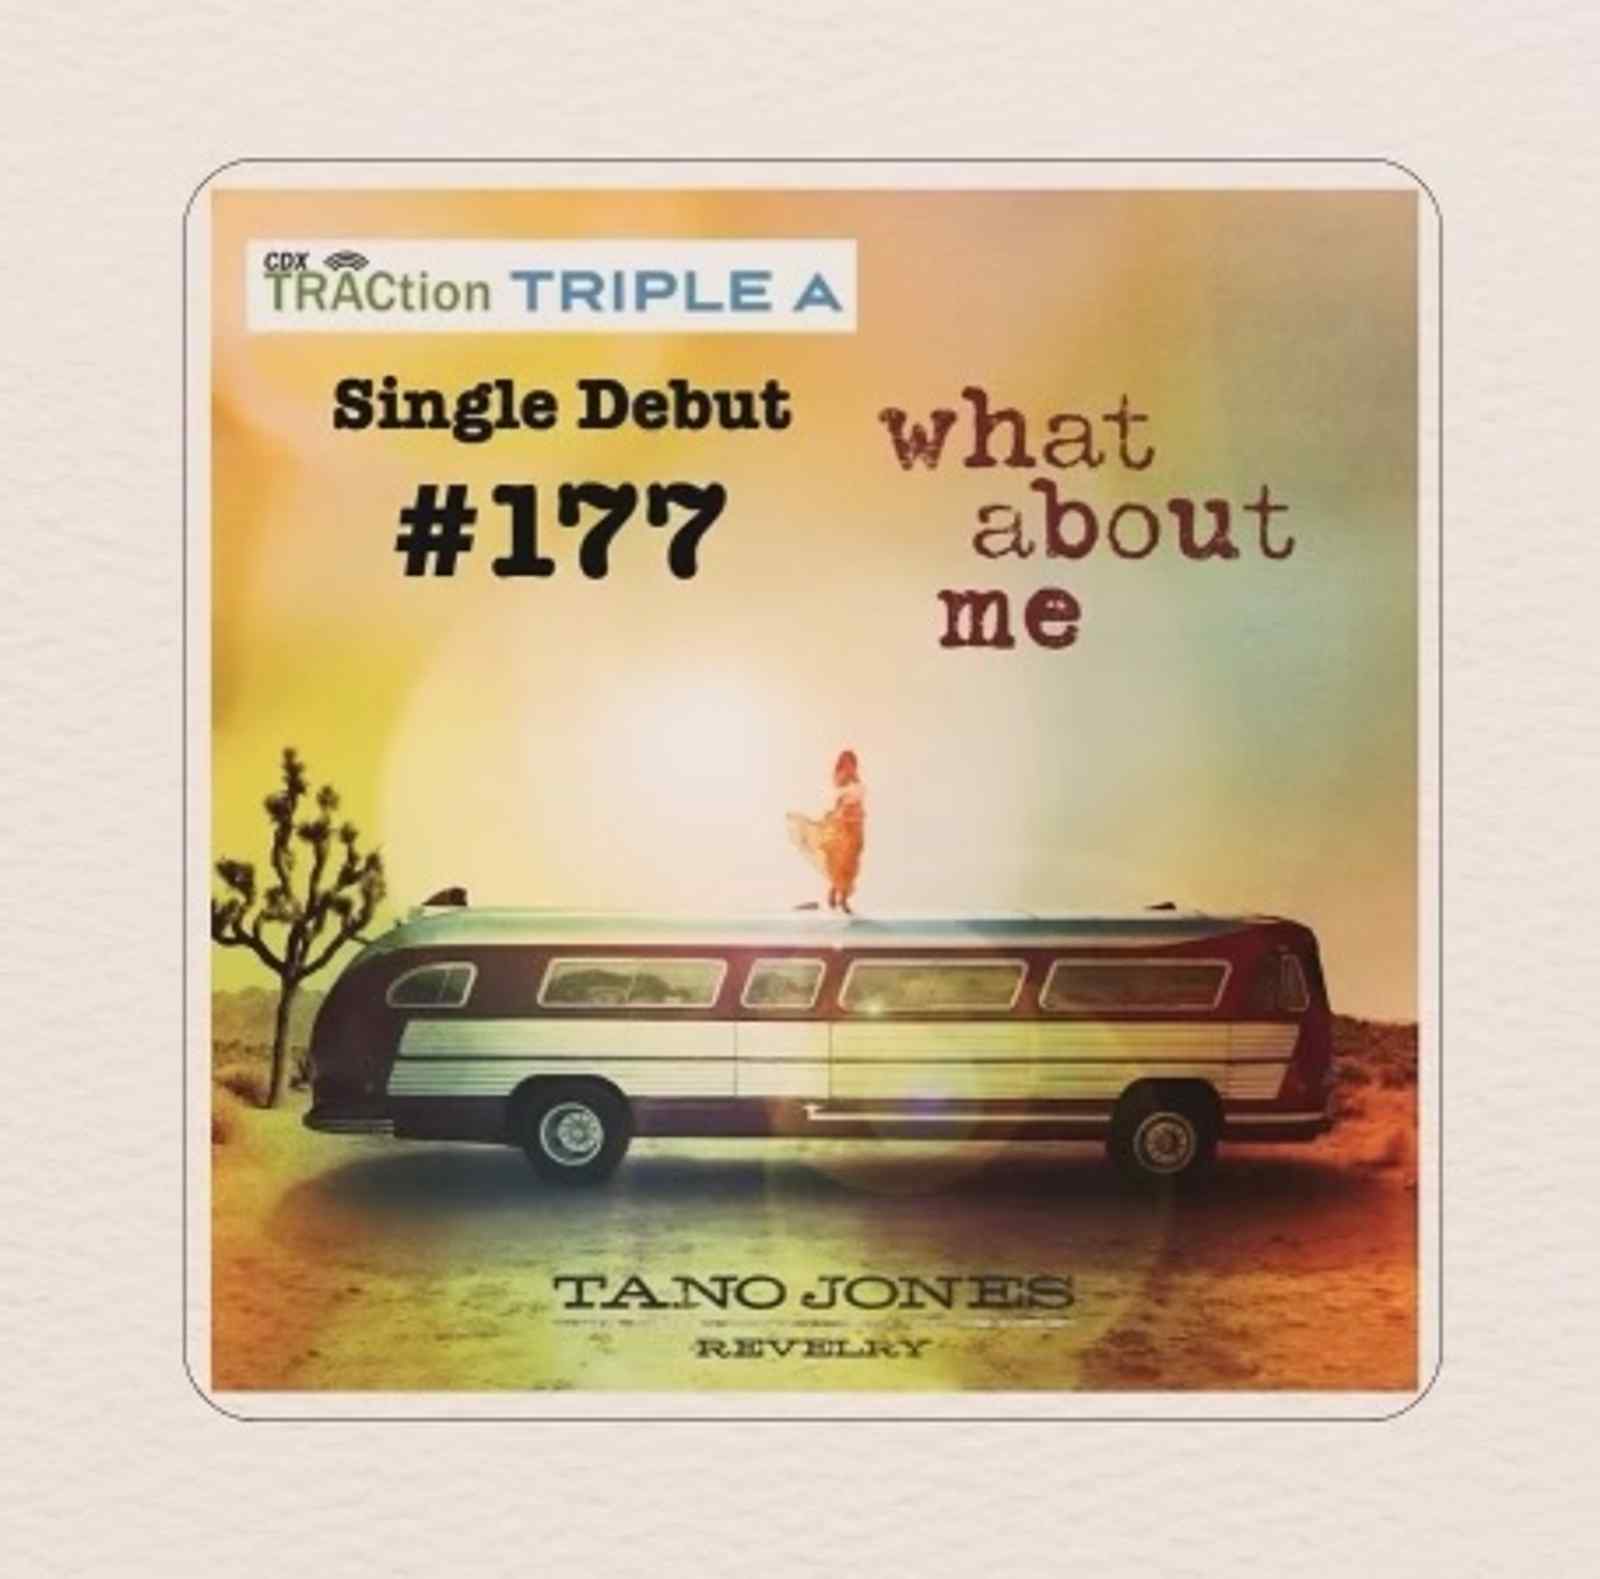 March 18, 2024 – TJR’s “What About Me” Debuts at #177